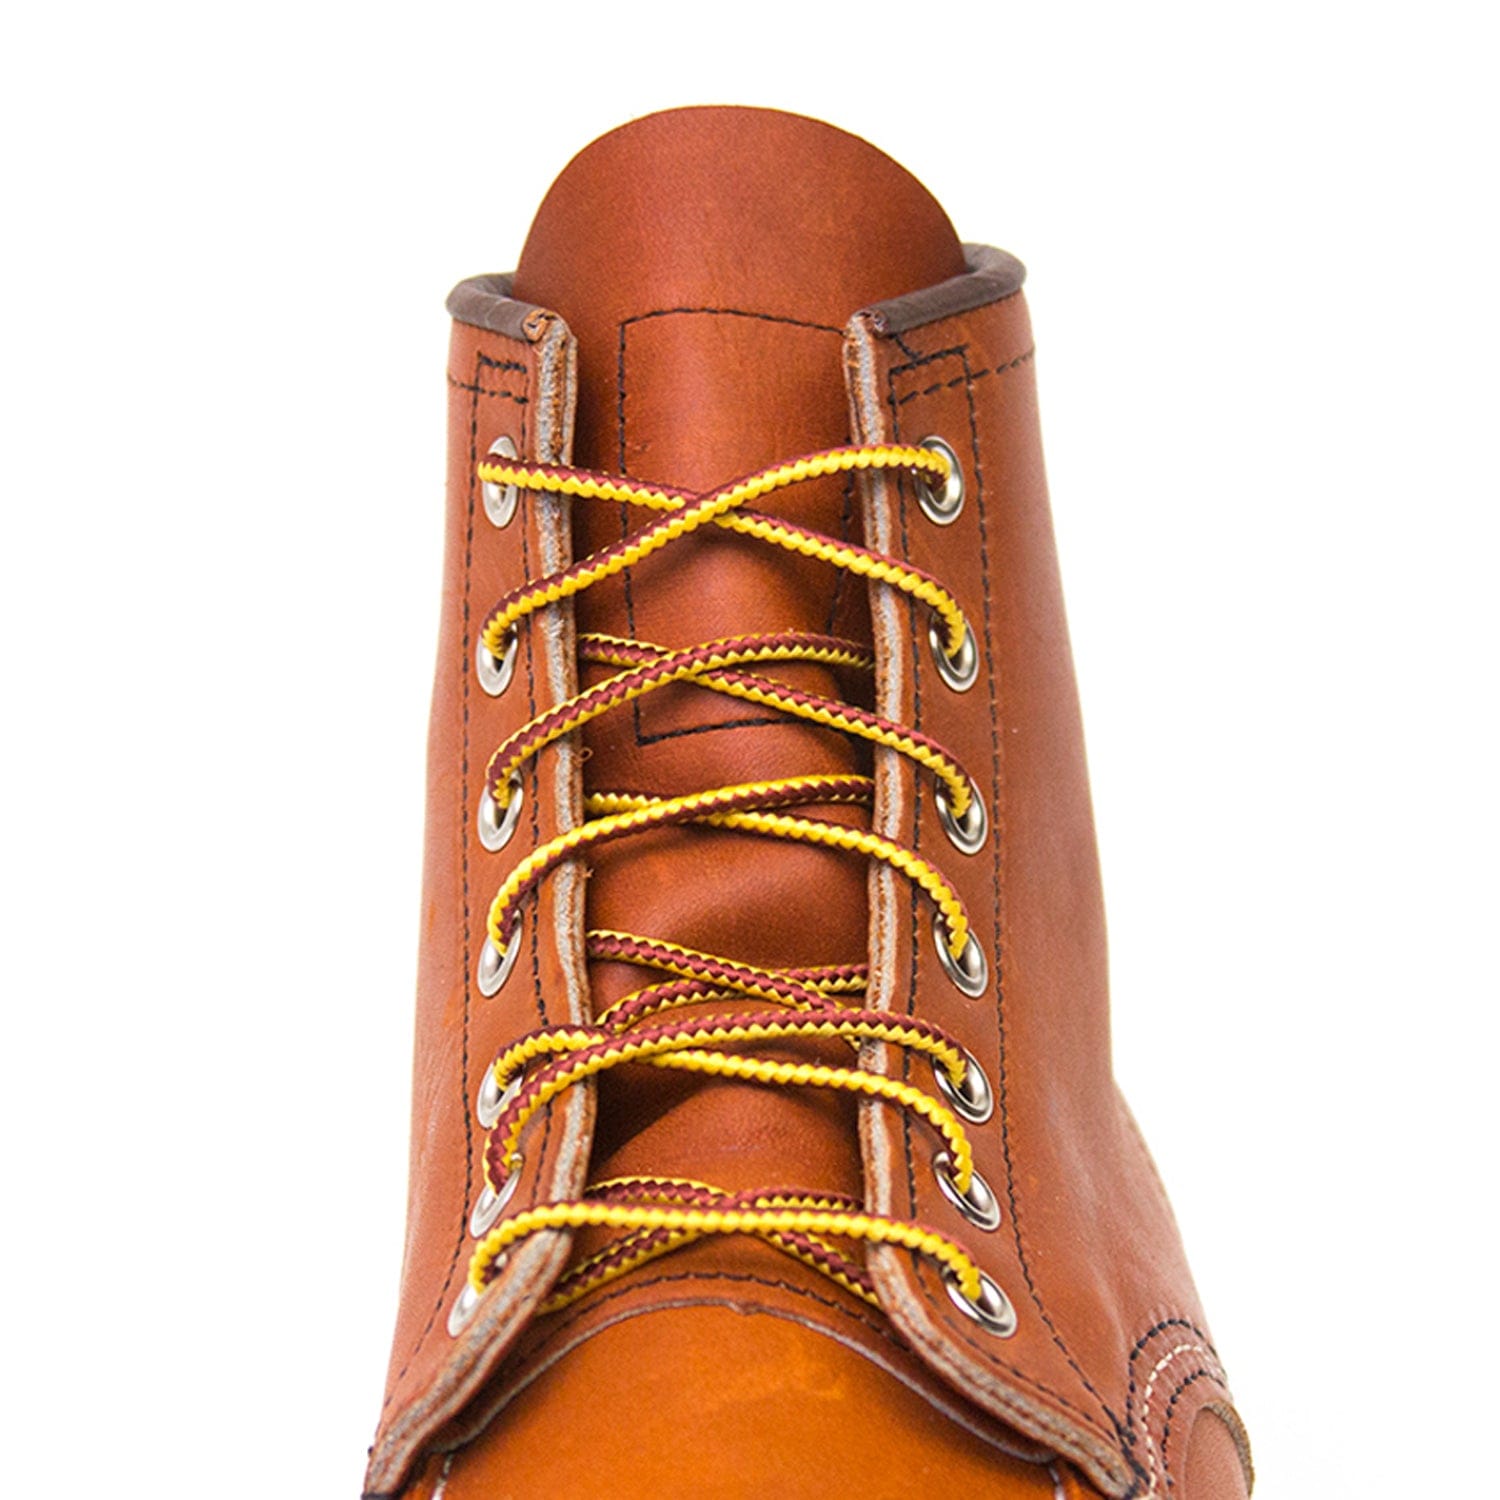 redwing boot laces